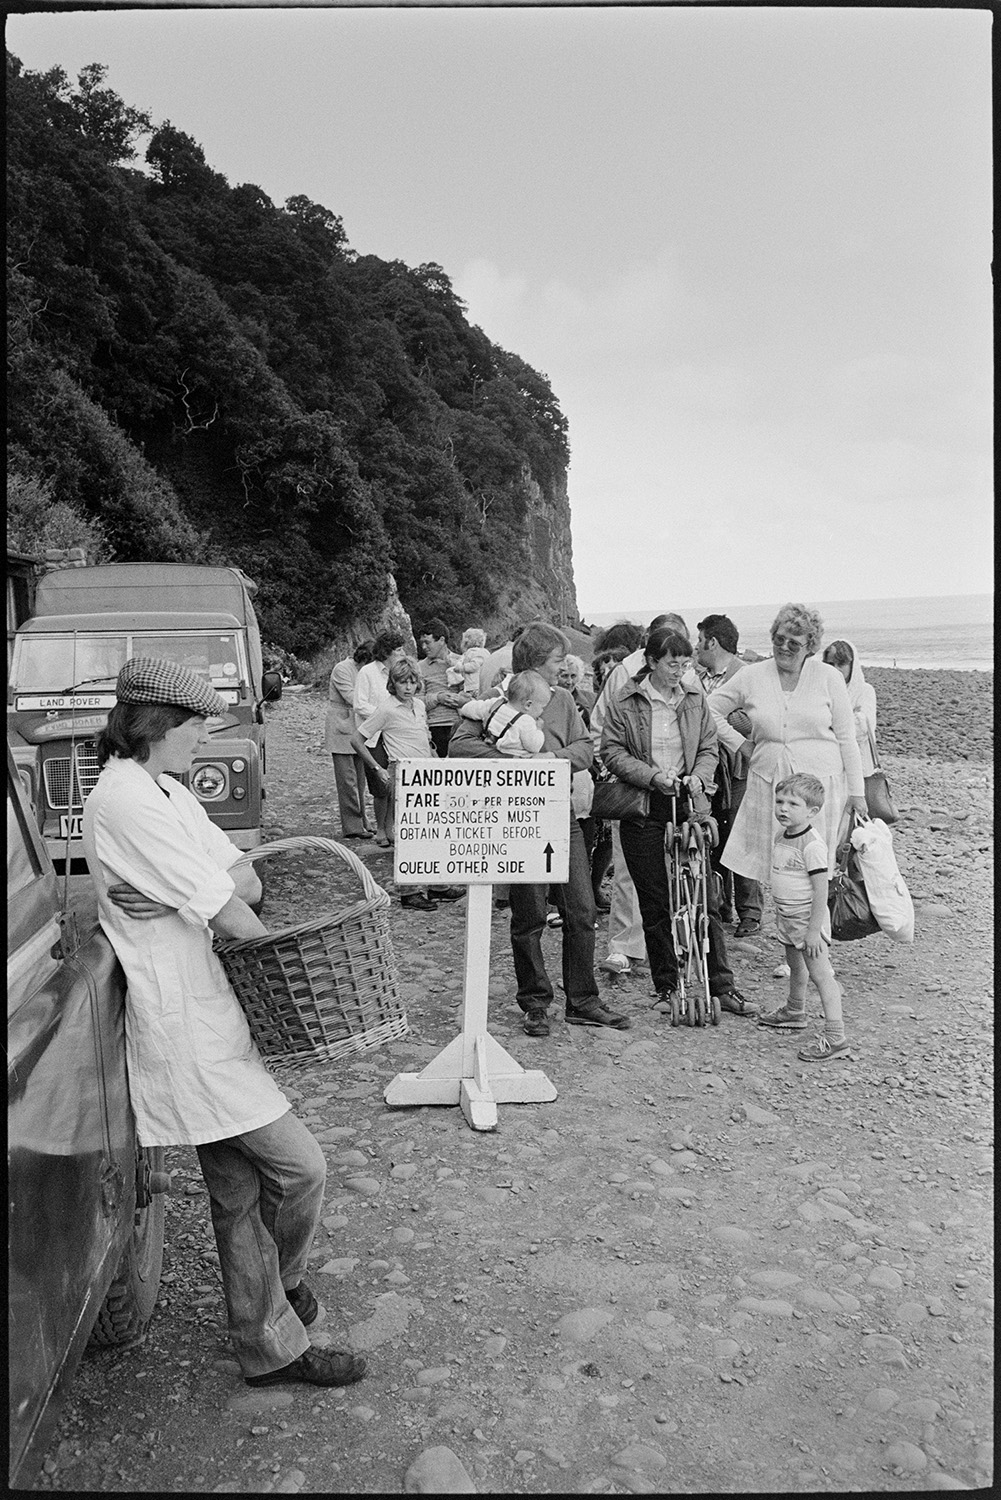 Holidaymakers, seaside village taking photographs, sunbathing, pebble beach with small boats. 
[Holidaymakers queuing up on the pebble beach at Clovelly to get the Land Rover service back through the village. A person holding a wicker basket is leaning against one of the Land Rovers.]